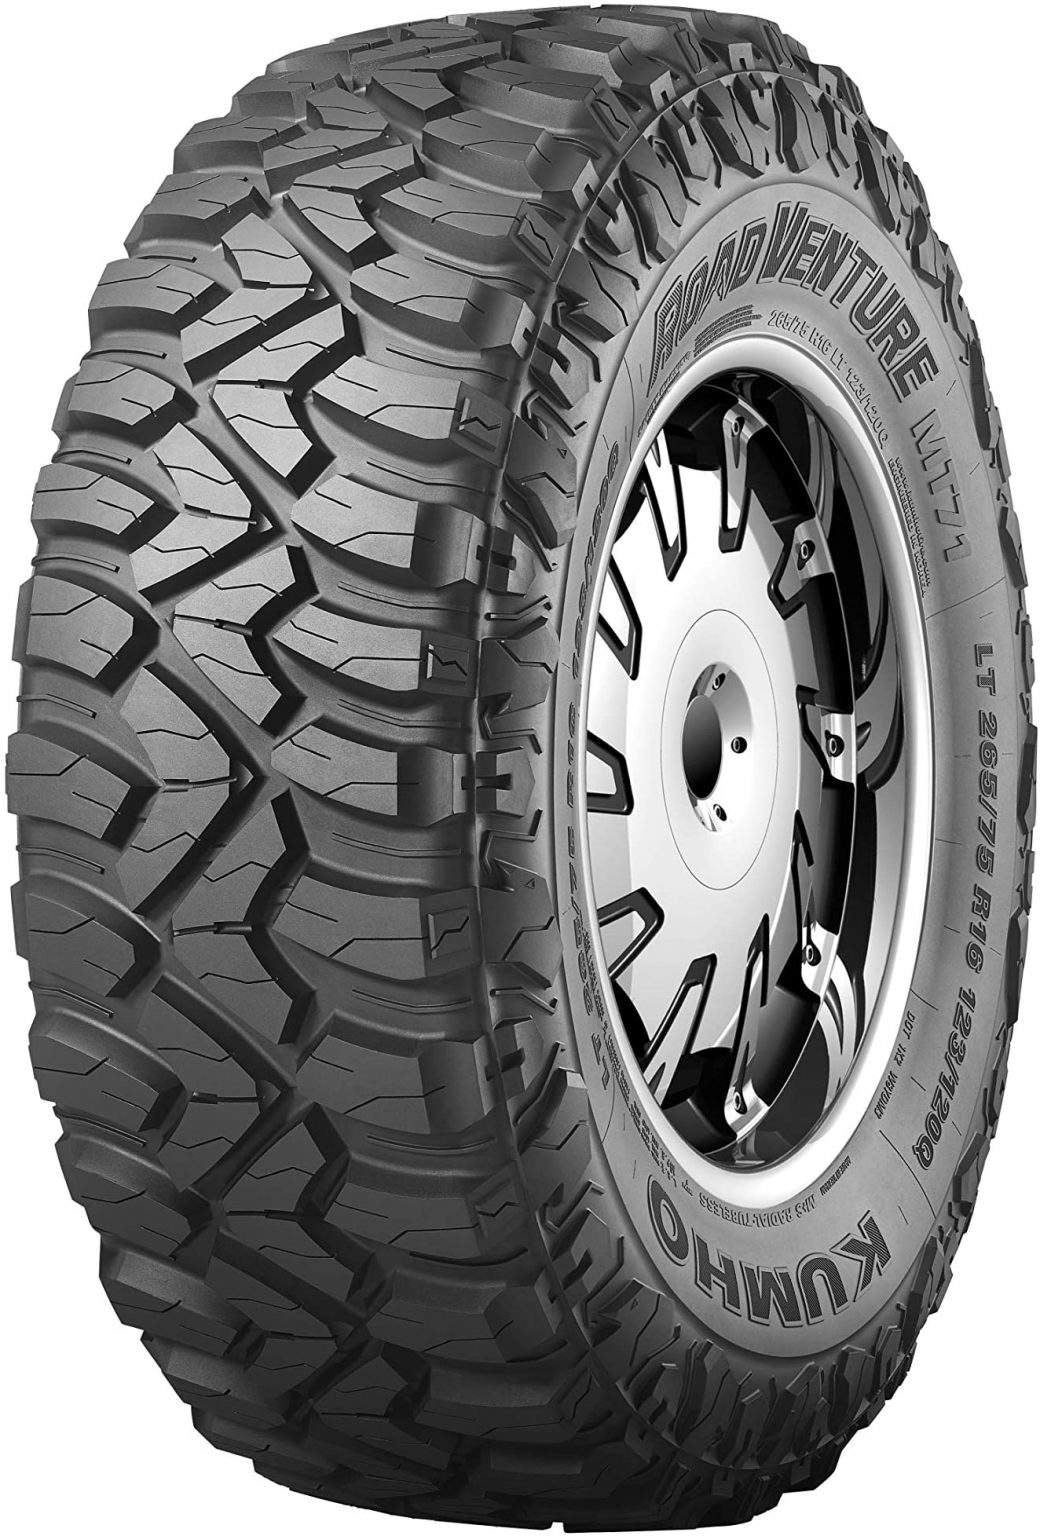 kumho-road-venture-mt71-tire-review-rating-tire-reviews-and-more